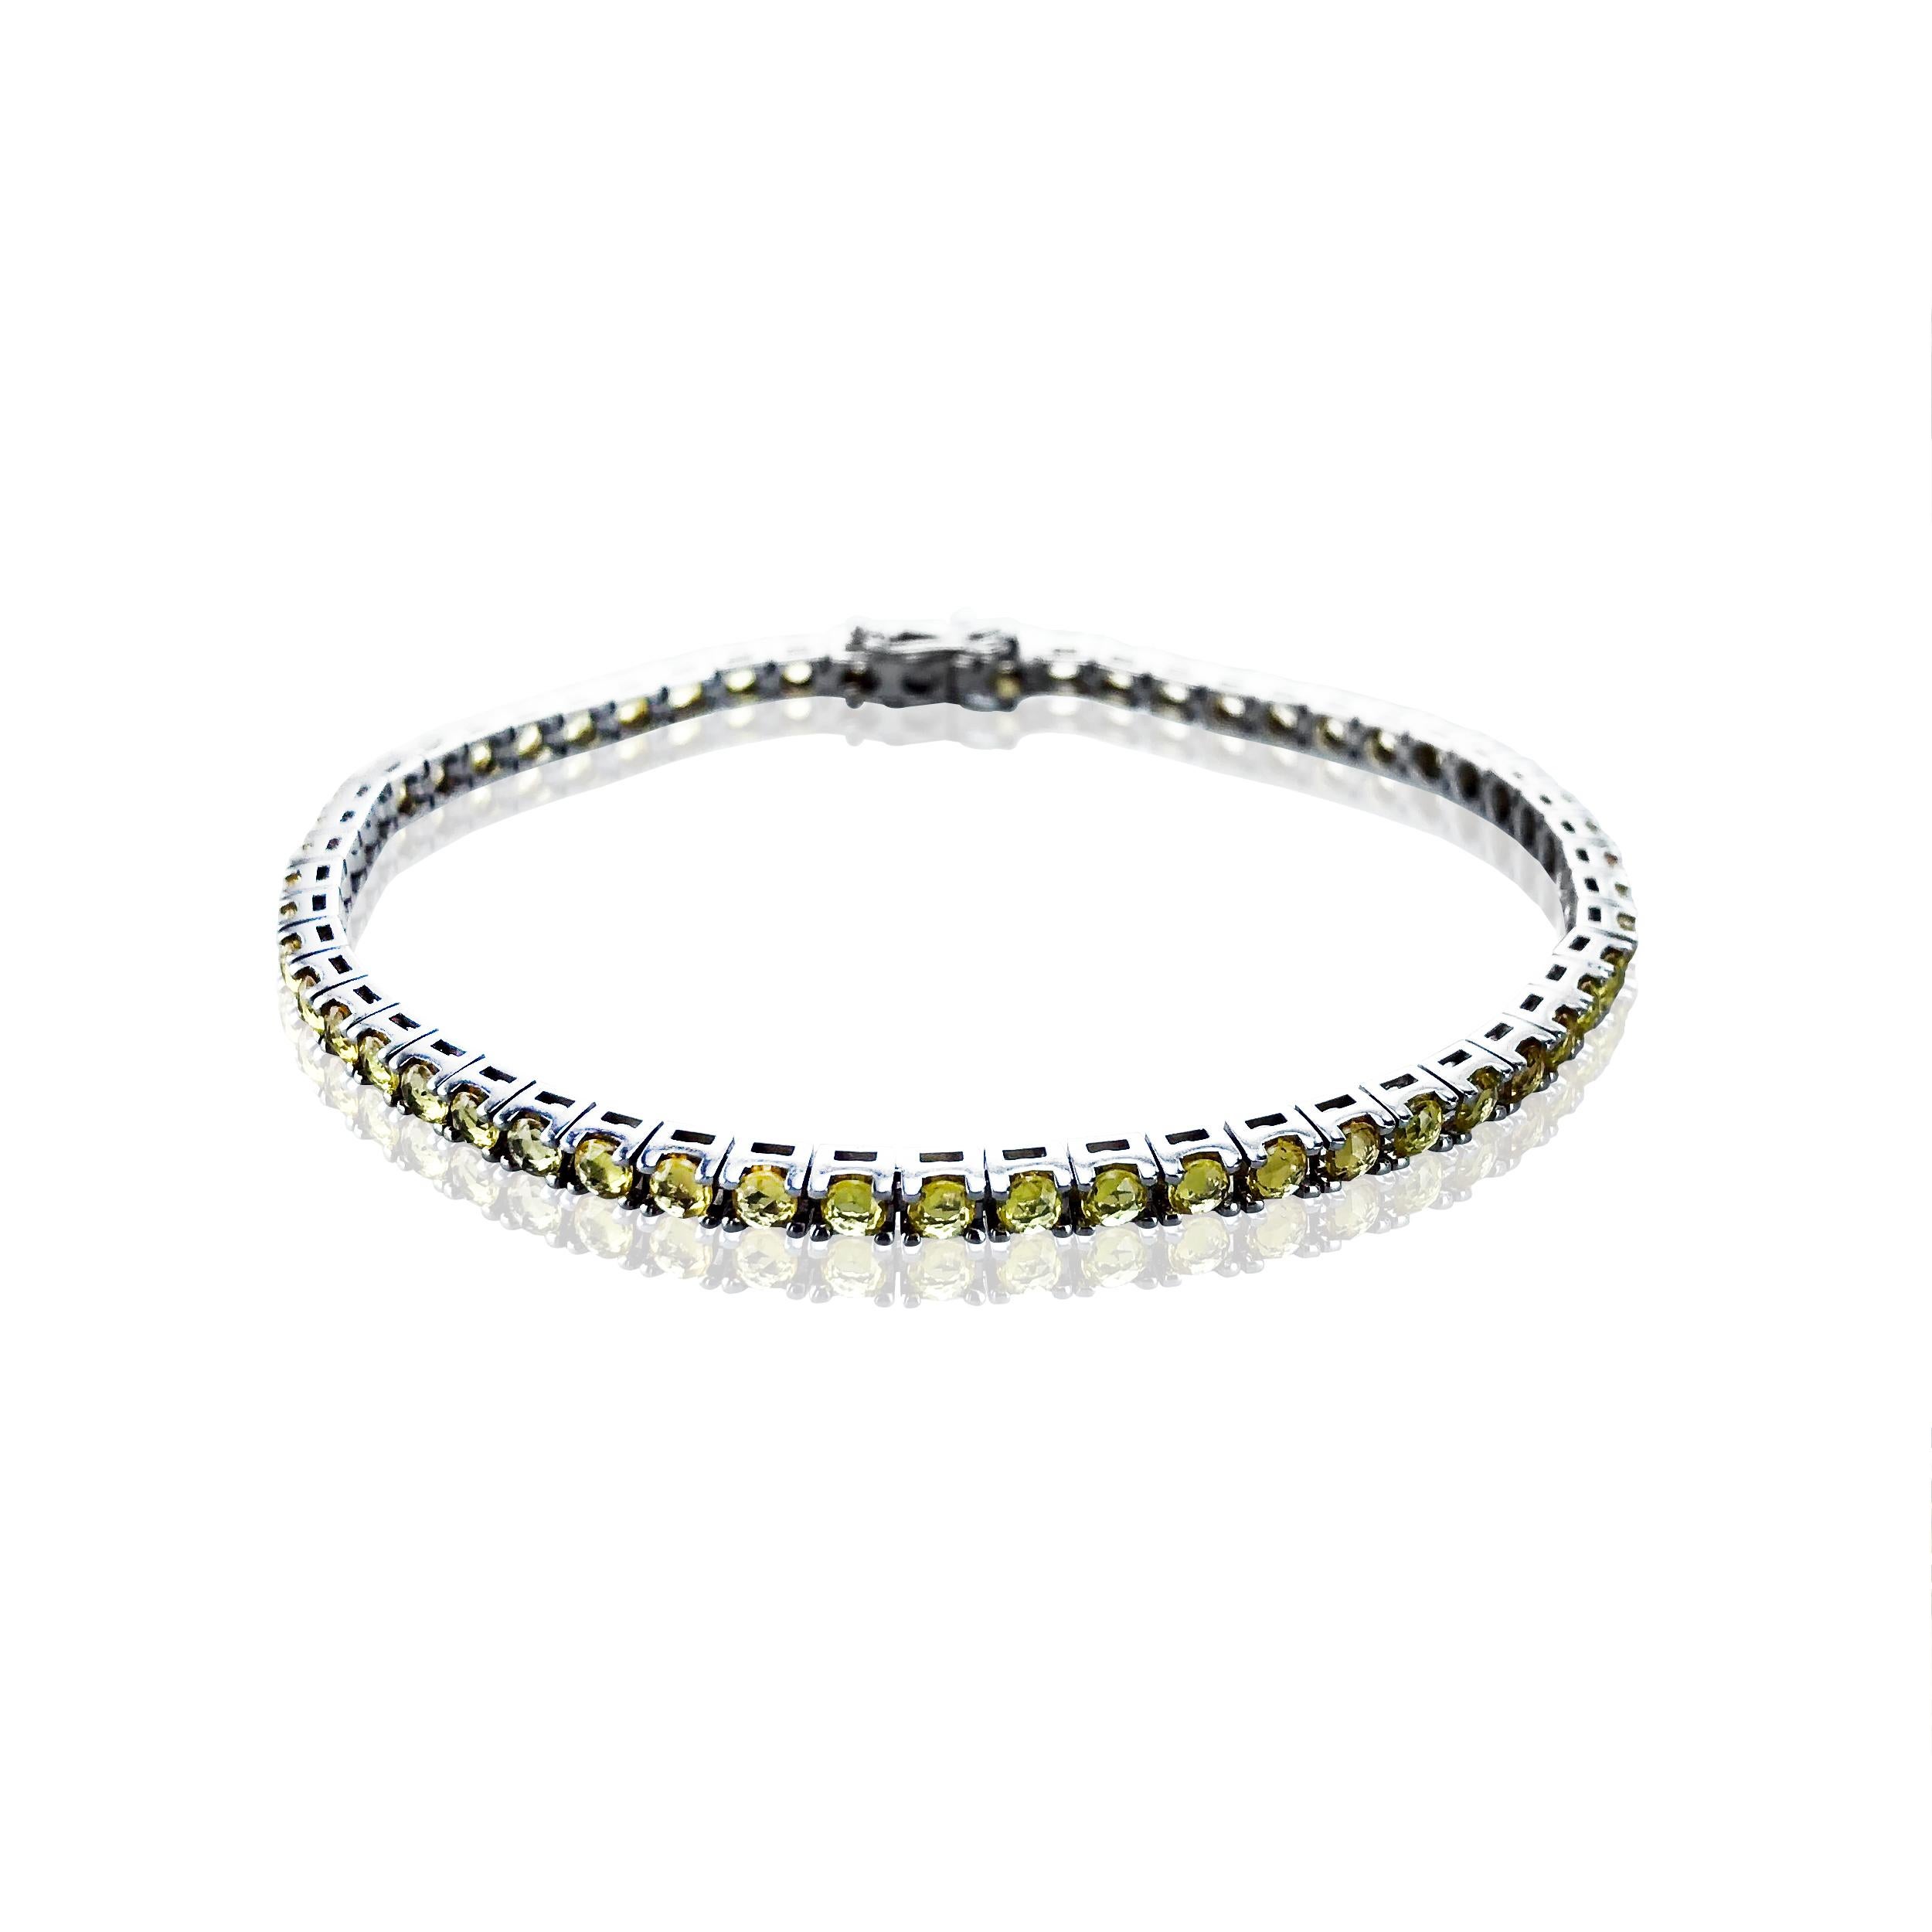 This gorgeous Yellow Sapphire 4.42 Carat tennis bracelet, is set in a TET designed 18Kt White Gold chain, making a striking statement on any wrist.  

Unisex it looks fabulous worn alone or stacked with other bracelets. 

Water proof it retains its